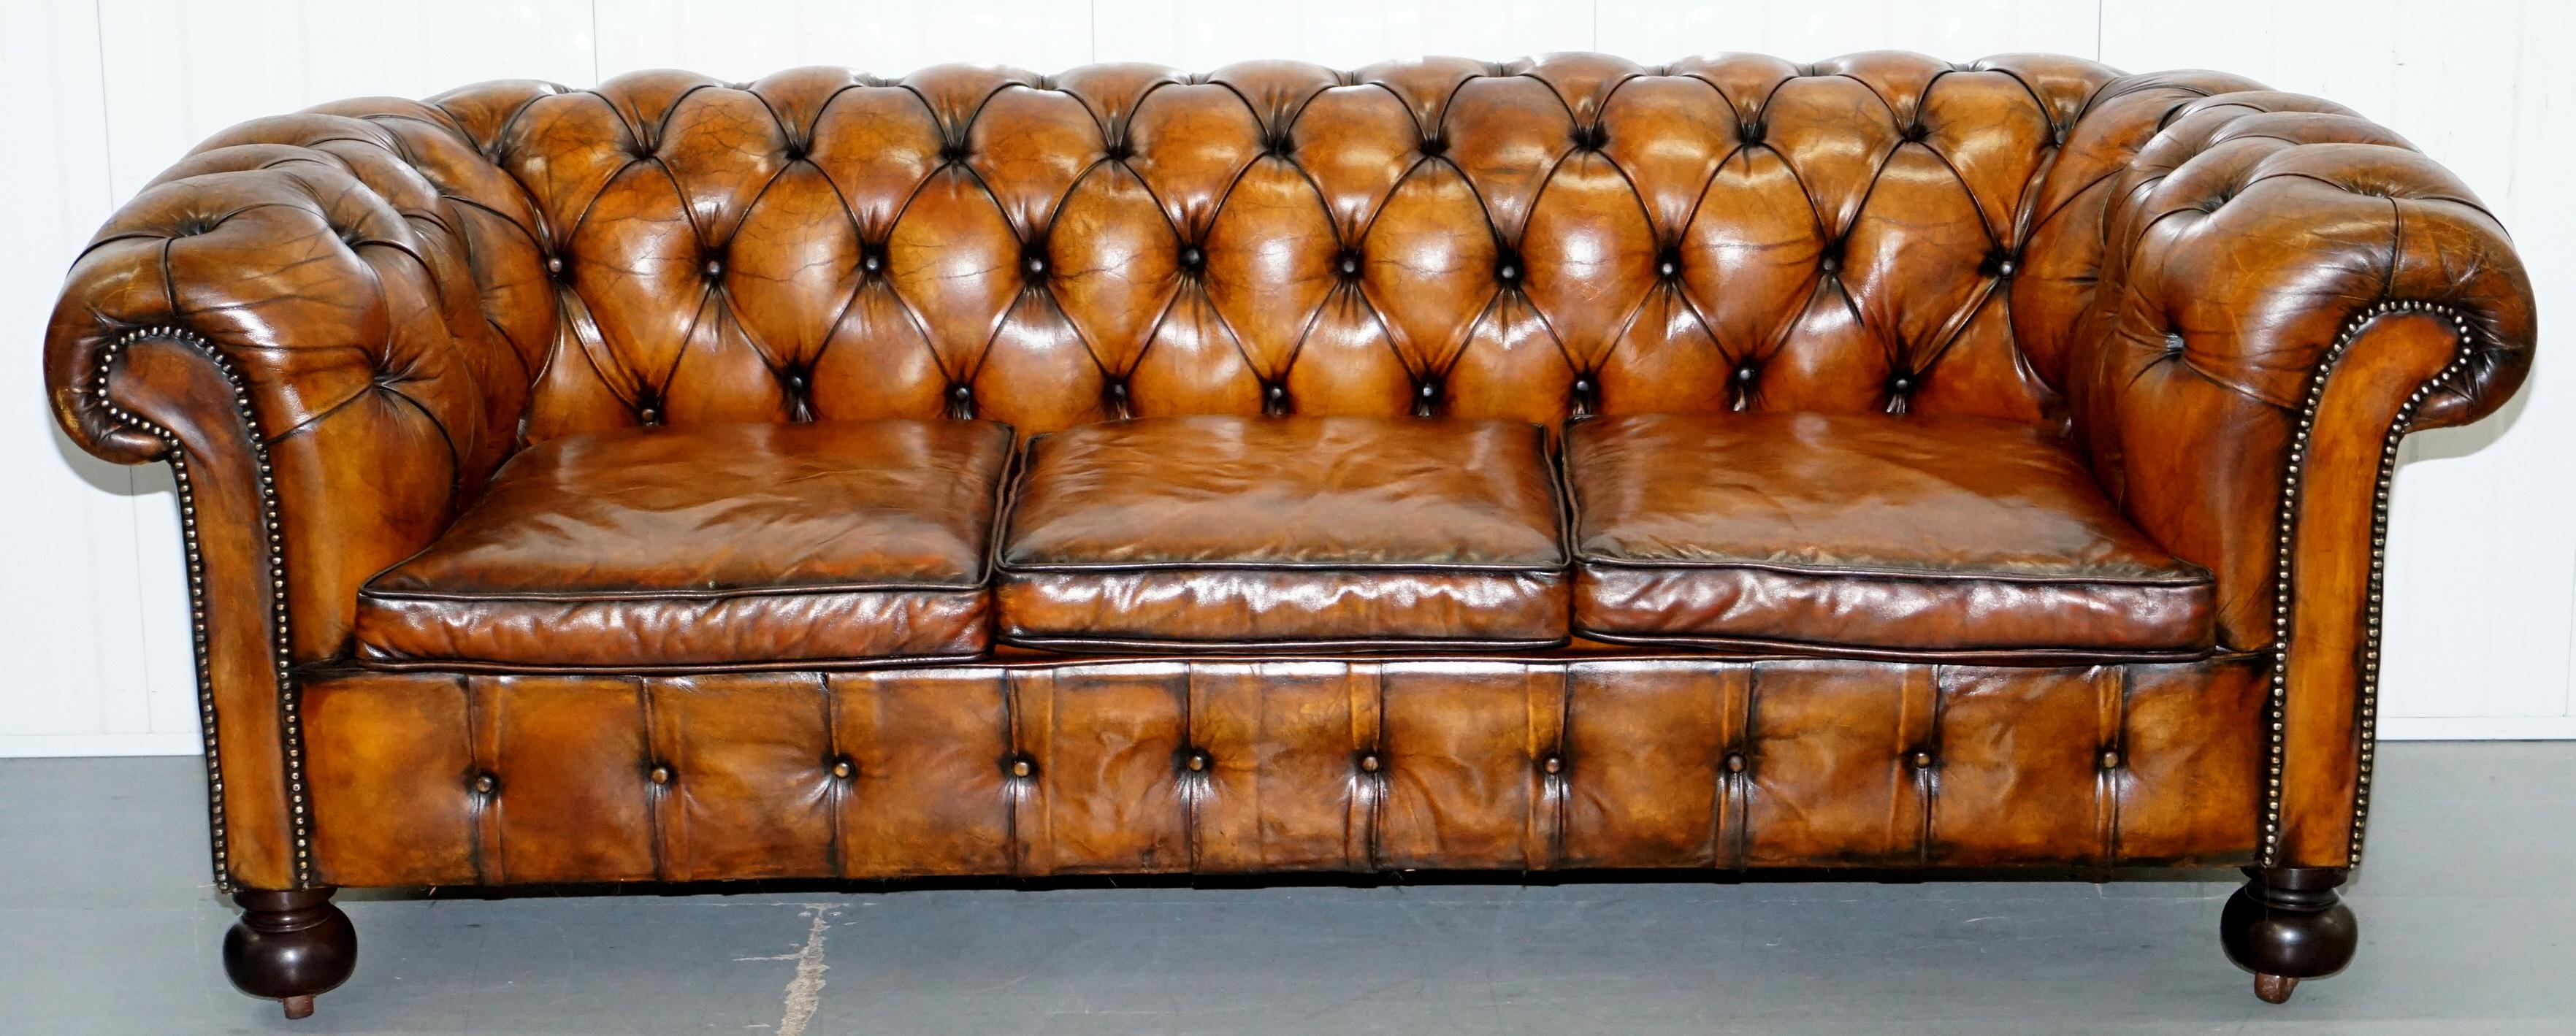 Very Rare Edwardian Fully Restored Hand Dyed Brown Leather Chesterfield Sofa (Britisch)